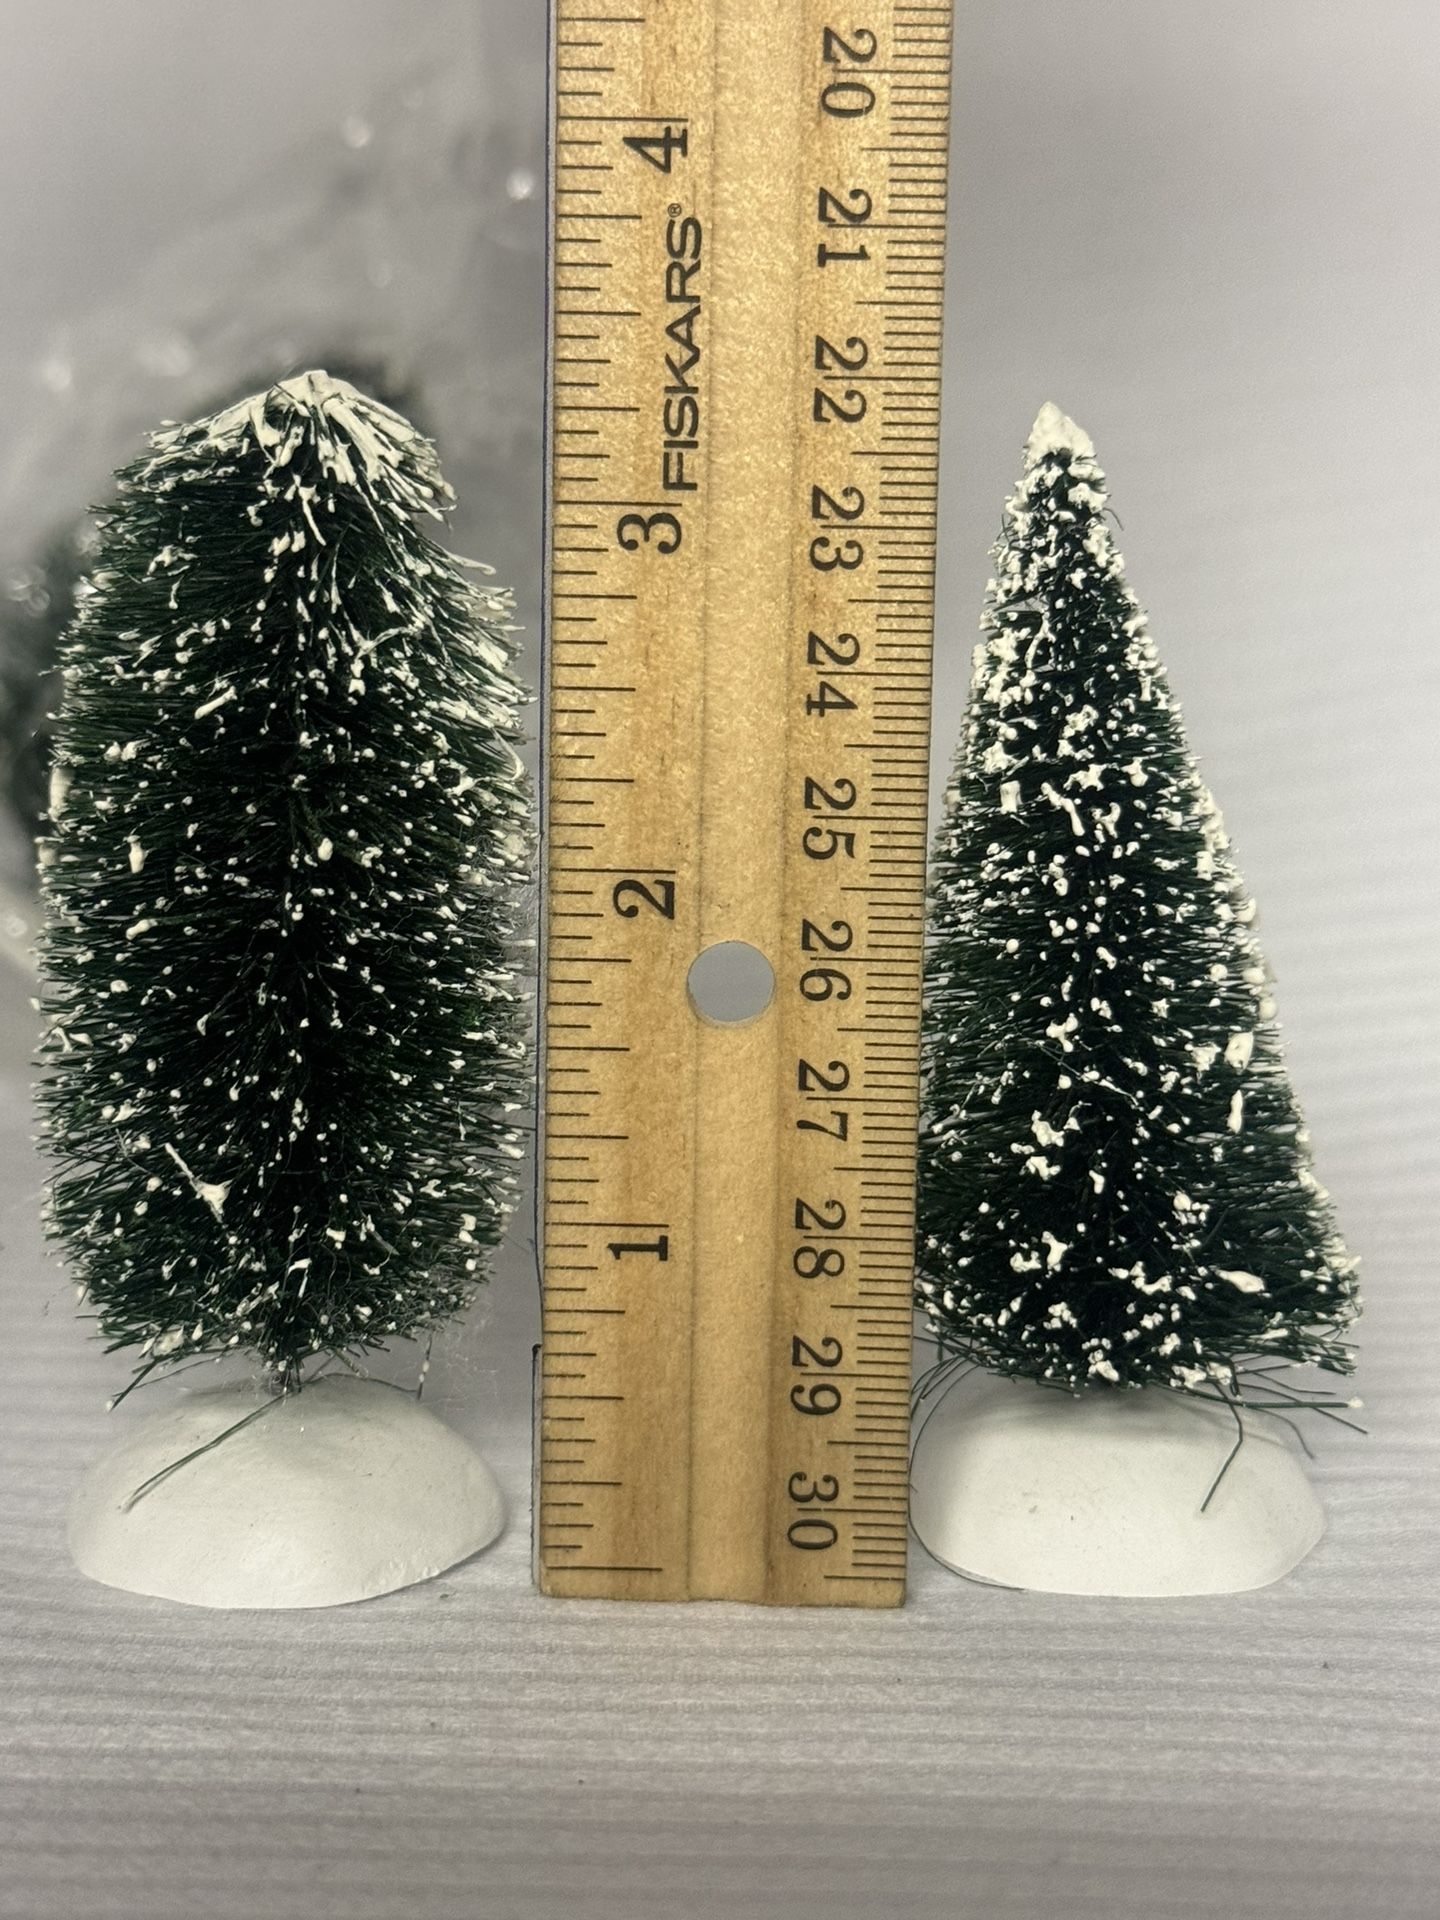 DEPT 56 VILLAGE FROSTED TOPIARY TREES 5202-7  SET OF 8 ACCESSORIES SNOW VILLAGE